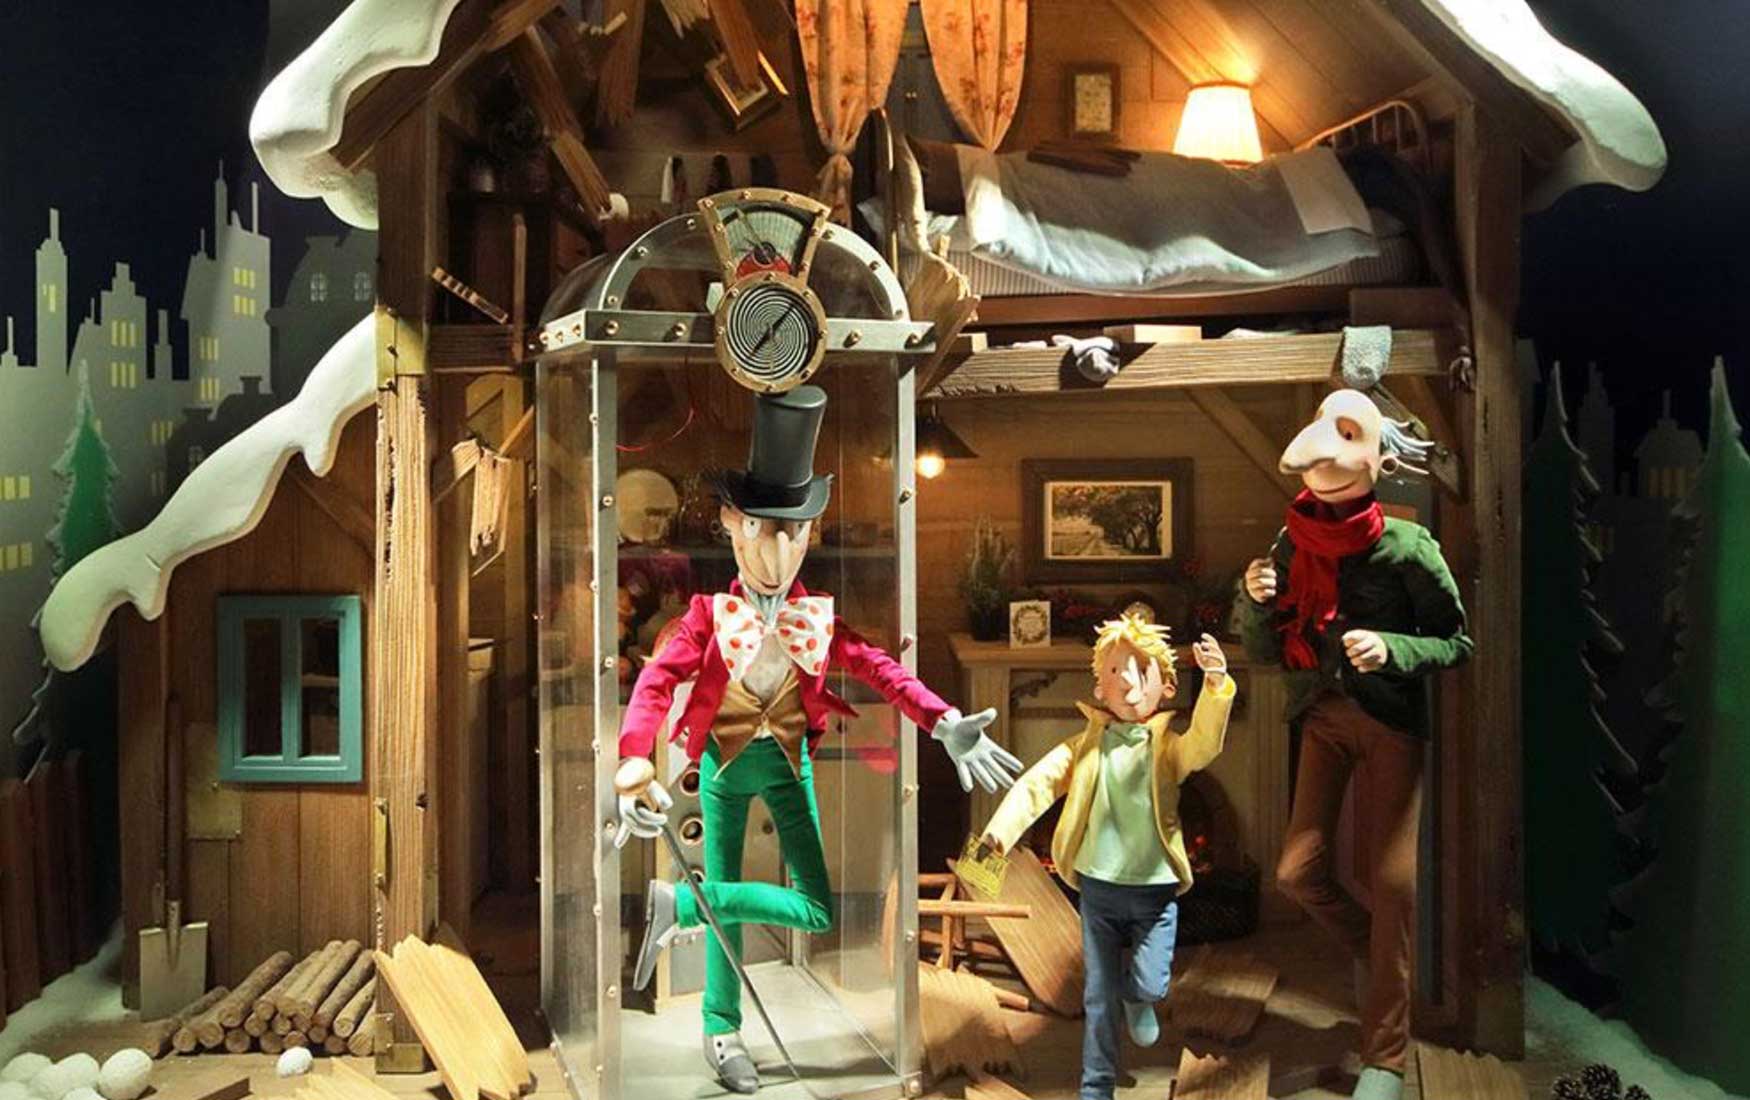 Quentin Blake style figures of Willy Wonka, Charlie and Grandpa Joe. They stand in a ramshackle house with the roof caved in, beneath which is a glass elevator. This was the Christmas window display at Fenwick Newcastle in 2019.